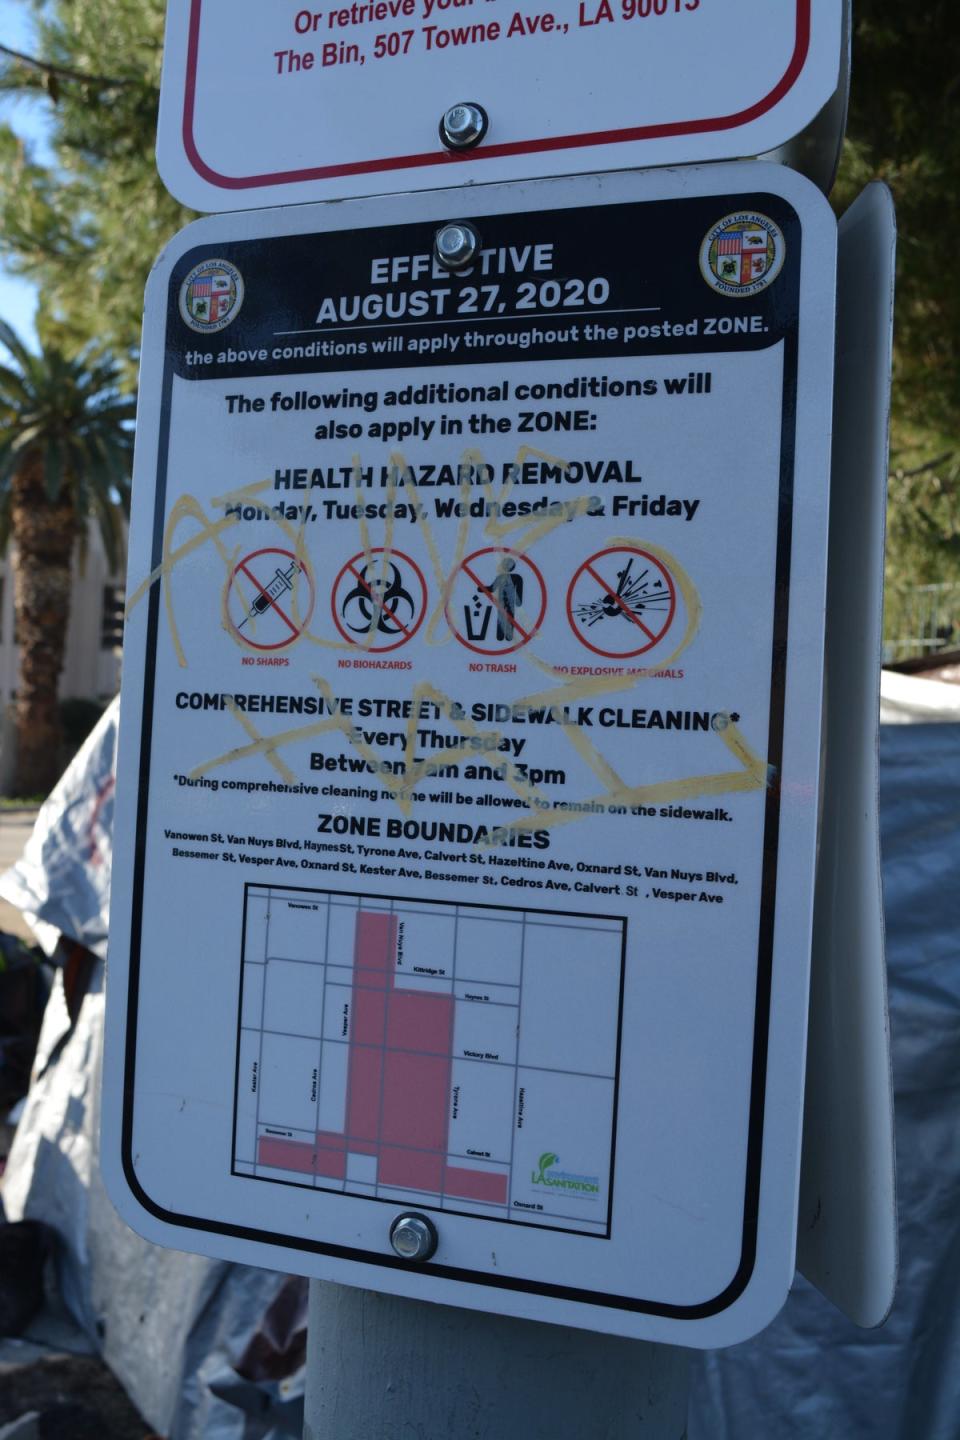 Homeless people can be arrested for camping within numerous protected “41.18” zones across Los Angeles (Josh Marcus / The Independent)